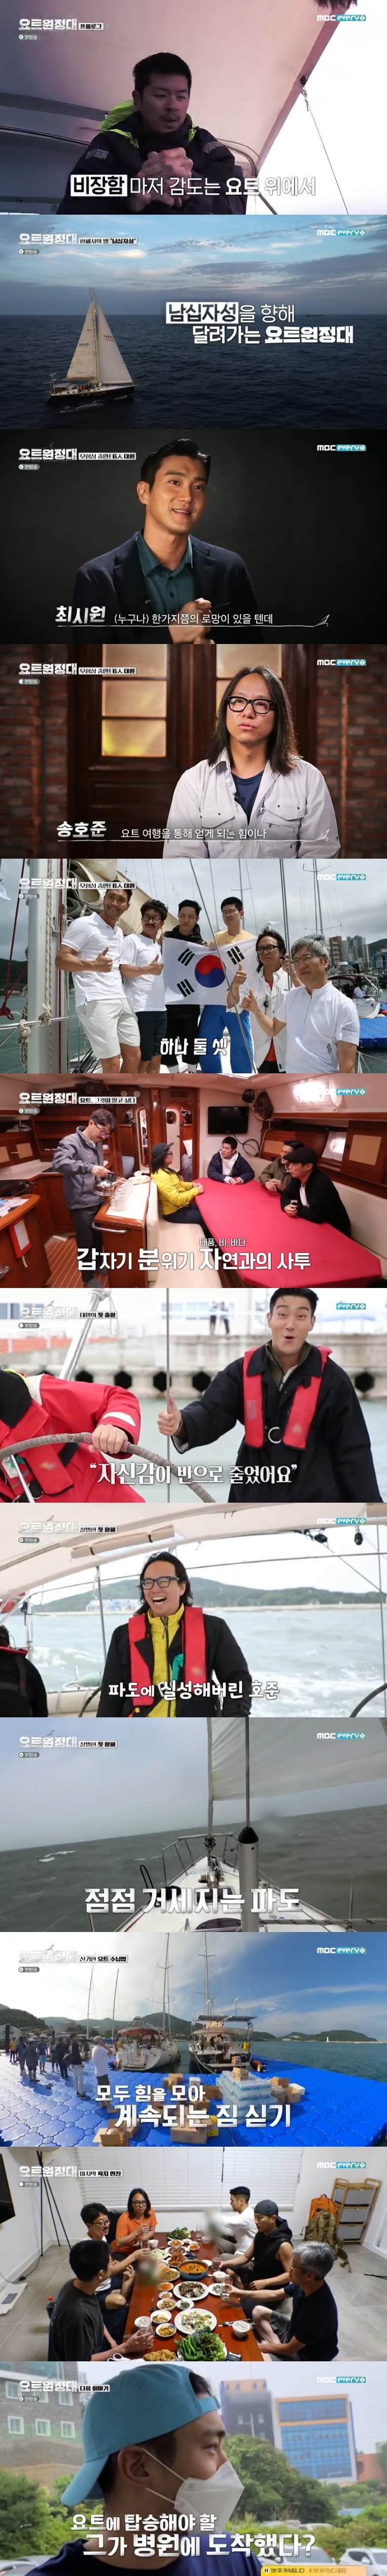 In MBC Everlons new entertainment program yacht Expedition broadcasted on the afternoon of the 17th, actor Jin Goo, singer and actor Choi Siwon, singer Chang Kiha, and media art artist Song Ho-joon met Sea captain Kim Seung-jin and finished preparing to face nature on yacht.Yacht Expedition is a documentary entertainment program that shows the process of challenging the Pacific Ocean voyage by four men who dreamed of adventure.While the first broadcast was curious, they showed a nervous and worried class before the full-scale voyage.In the prologue, the members seemed to be unable to keep their bodies from the rough waves from the morning, and even the typhoon met Danger, but they continued to cut through the rough sea in the endless obscurity.The members started from Geoje Island. The destination was the poisonous constellation Nam Cross that will be met at the beginning of Pacific Ocean.All of them expressed their expectations in a preliminary interview: One of the romances, Getting energy, and Every human likes adventure.Crewes, who arrived at the appointment site shortly afterwards, had been watching from yacht; there were five rooms (cabins), five toilets and a large living room and kitchen.It was the explanation of Sea captain Kim Seung-jin that it was a very suitable ship to cross the big sea.Crewes, who spoke to Sea captain, were also worried about the sea environment with excitement.Crewes also explained why they were sailing. First, Chang Kiha said, The trip to meet nature a lot does not disappoint me.I wanted to be a big hit because I did not have a long time exposed to big nature. Jin Goo said, I like to talk to other people and stories I did not know.Choi Siwon said, I think that the sea trip was only coastal, but in fact it was the biggest attraction because I had never crossed.If you endure 20 days here, things on land will be nothing. In addition, Song Ho-joon said, It is a concept to lazy this trip as much as possible.Sea captain said, I will be a really fun voyage this time.The members had experienced their first The Embarkation for Cythera in the strong winds, and everyone was nervous about the rough voyage, such as strong winds and waves.In response, Choi Siwon said: Before The Embarkation for Cythera, I was confident, but now my confidence has halved.I think the tension has grown bigger, Chang Kiha said. I thought I was afraid that I would be overturned because I was shaking more than I thought.But Sea captain did not turn over, so it was fun from then on. As the ship was wobbling badly, Jin Goo was embarrassed, saying, Do you make sense? What is this? He said, I was born and I tried seasick for the first time.The angle of the boat tilted was enormous, he said.After practicing The Embarkation for Cythera, they gathered in Geoje Island for the real Embarkation for Cythera a few days later.Crewes loaded the food for a month into yacht; after that, they enjoyed dinner on land for the last time.Kim Seung-jin answered questions that the members were curious about, and told them how to deal with Danger.Next weeks trailer revealed Crewes worried about heavy rains, and Choi Siwon also raised his curiosity by visiting a hospital, not yacht.